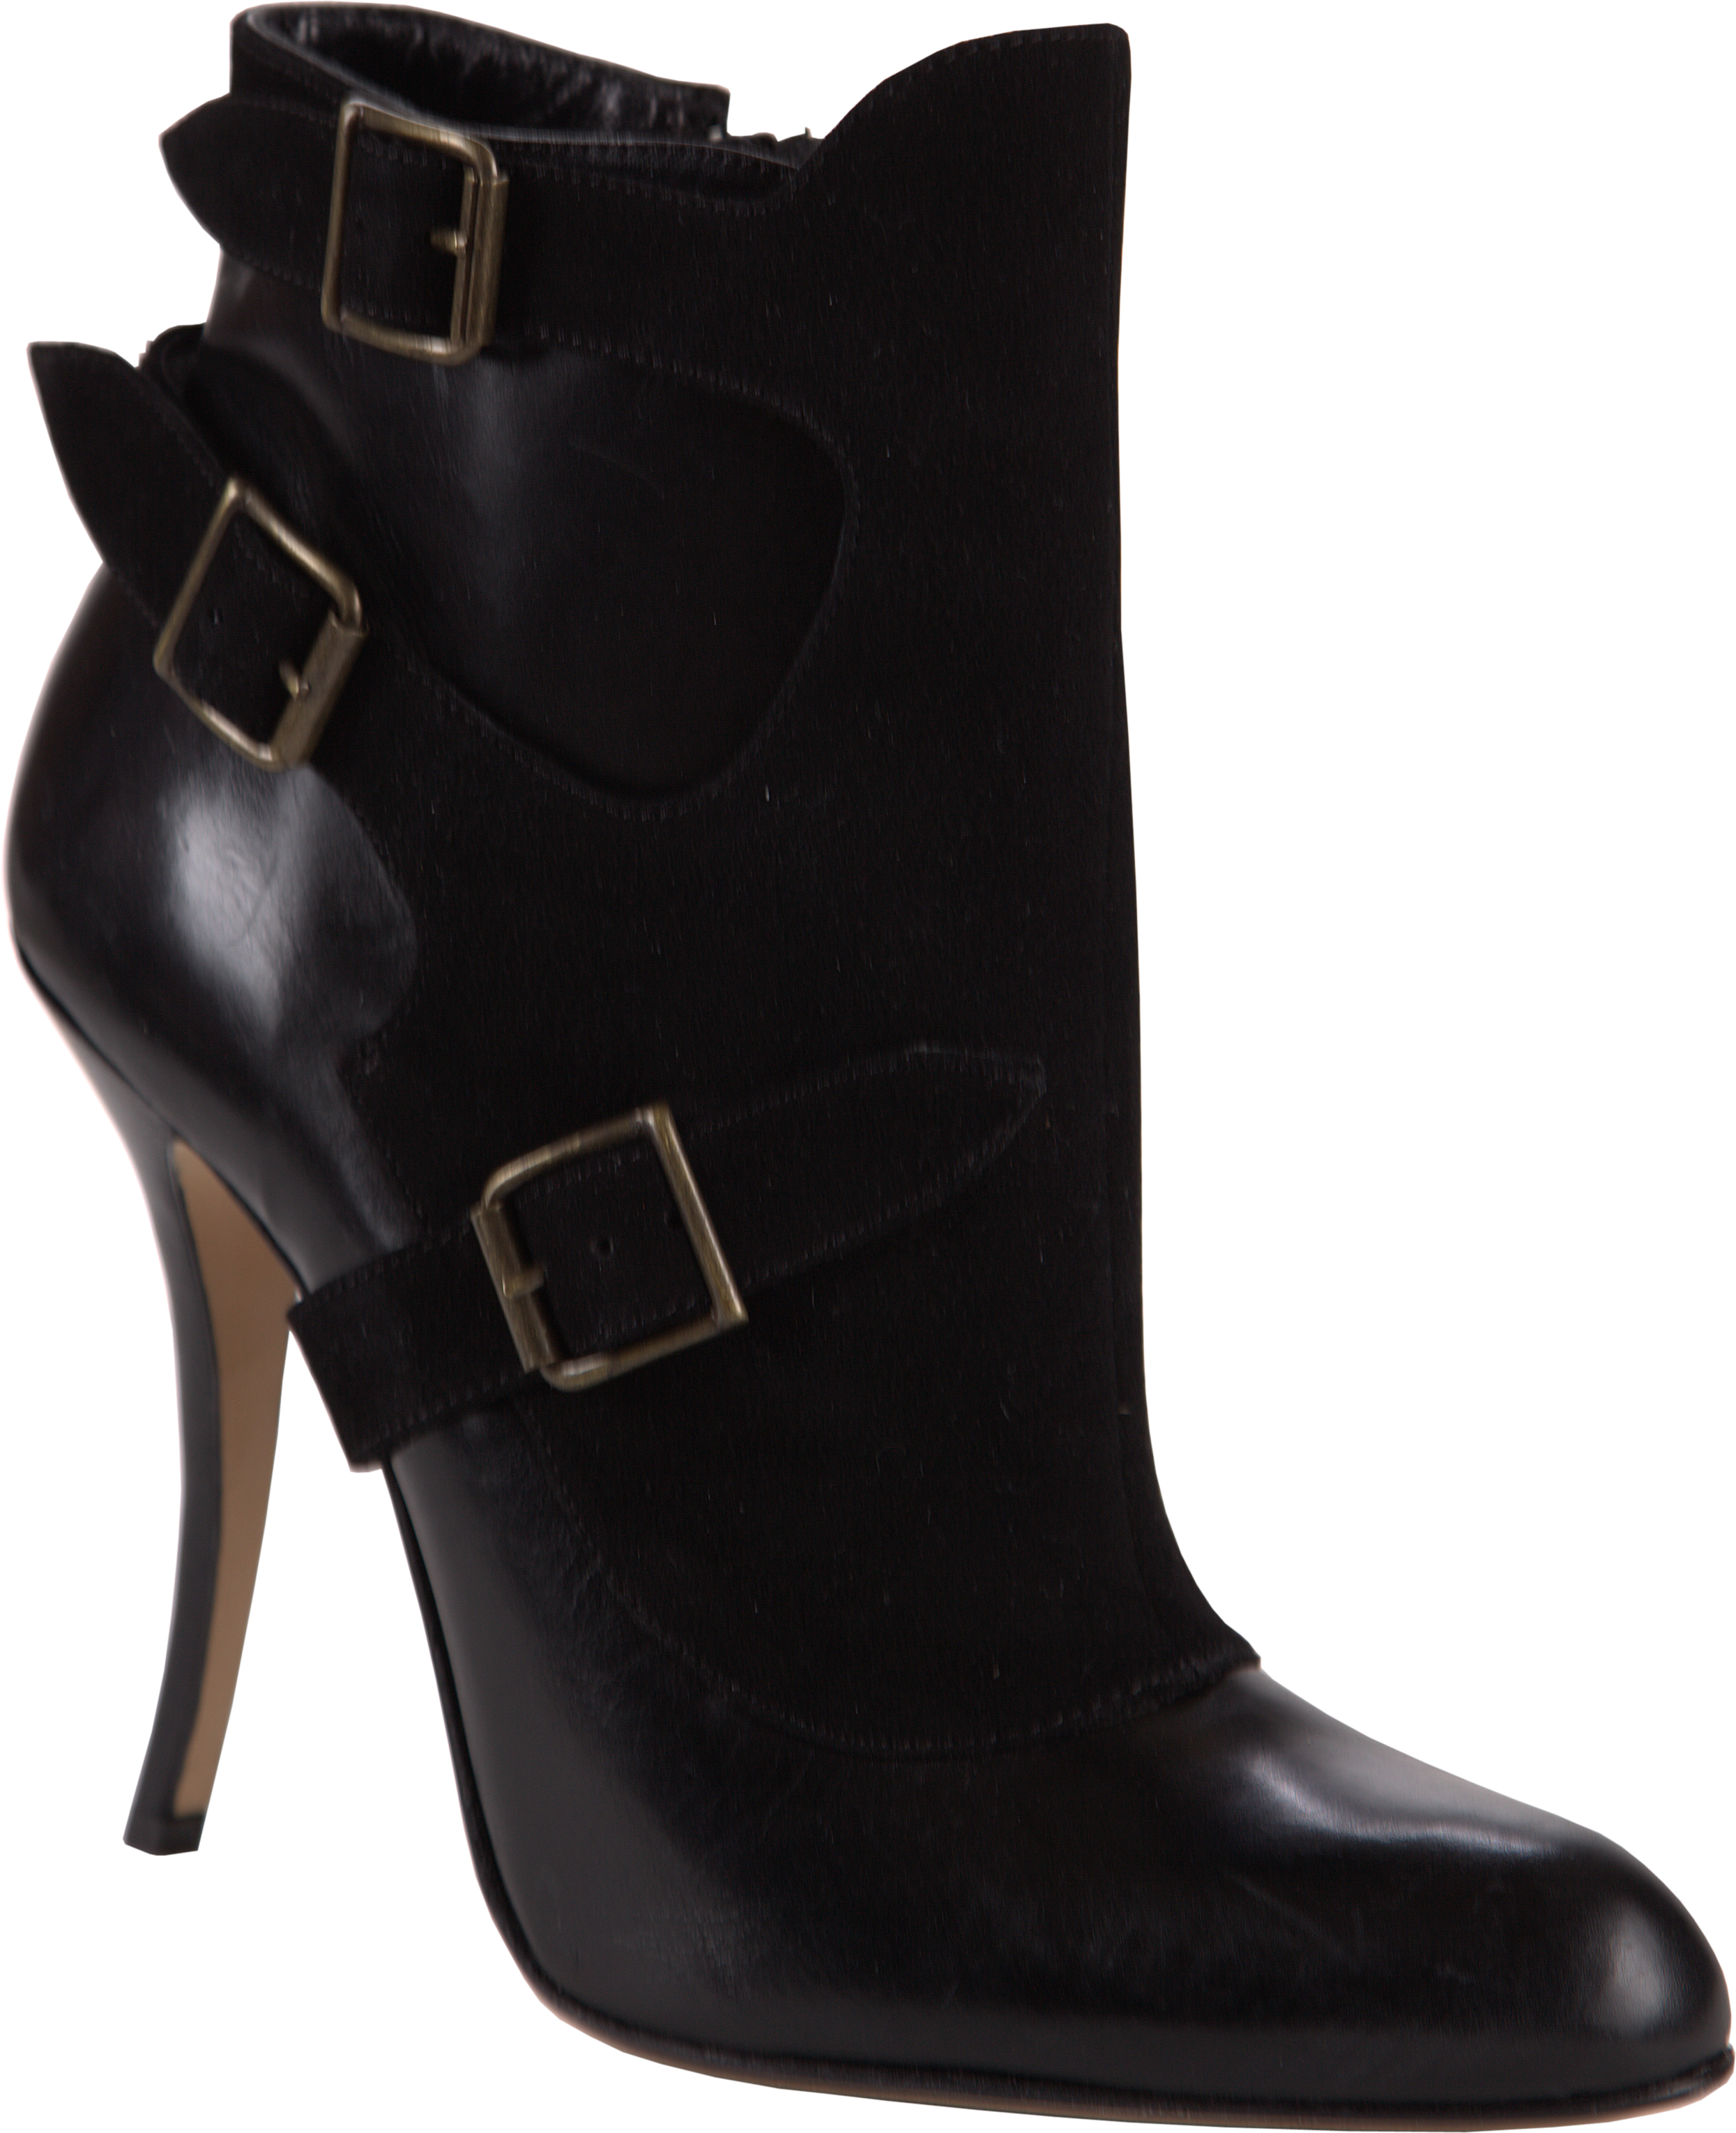 Riding Boot High-heeled Shoe Fashion Boot - Michael Kors Ankle Stiletto Boots (2490x3059)